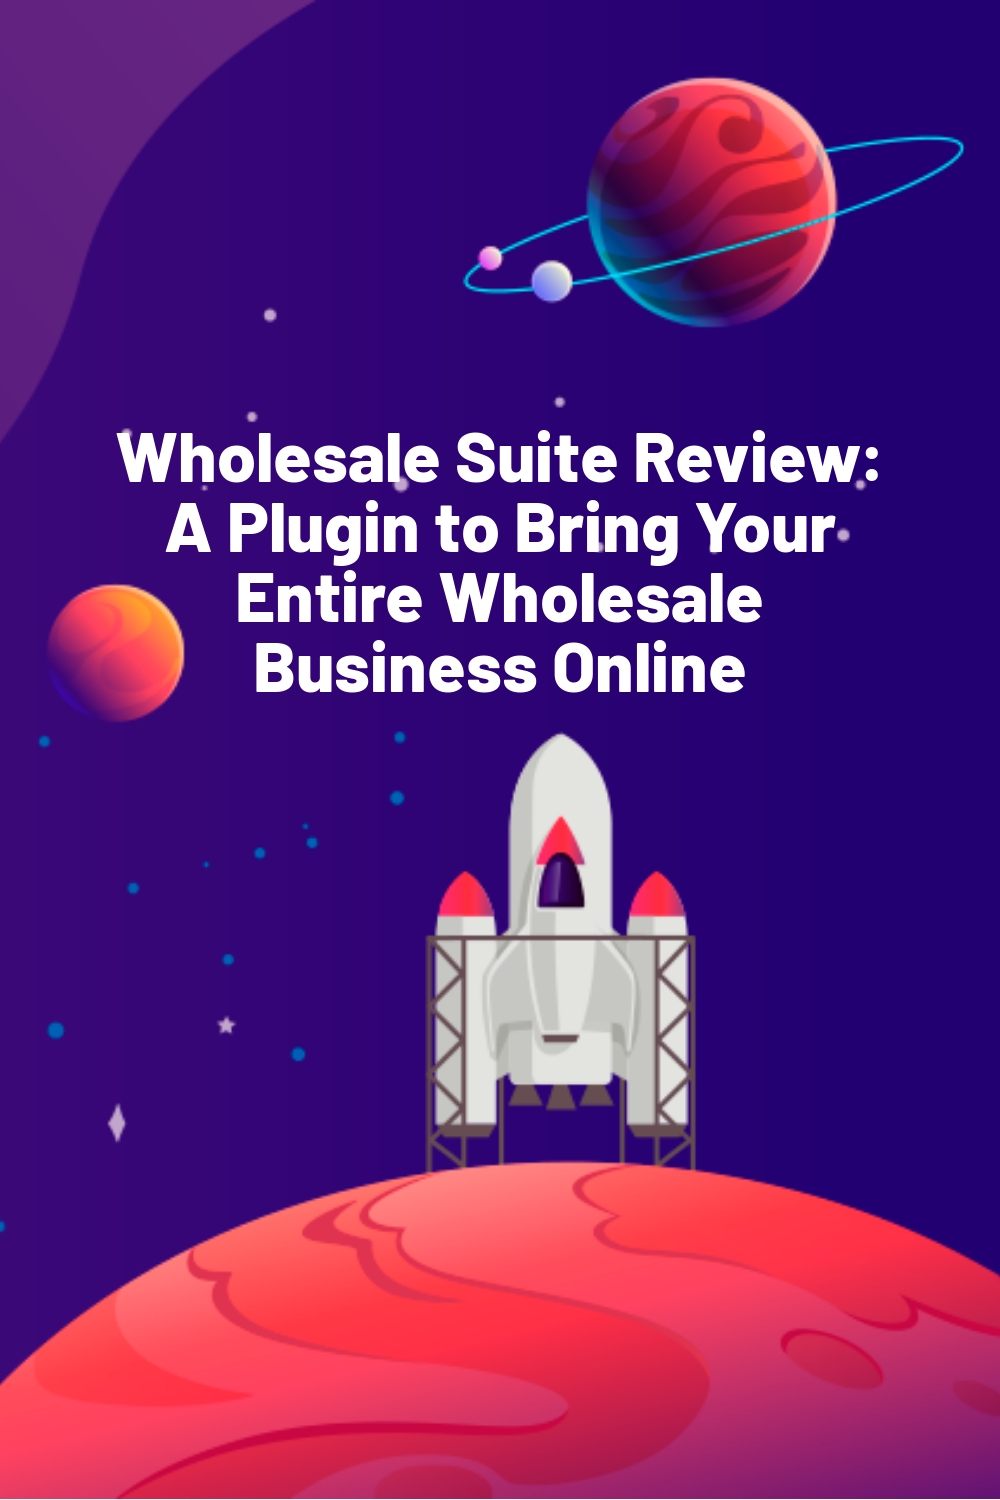 Wholesale Suite Review: A Plugin to Bring Your Entire Wholesale Business Online